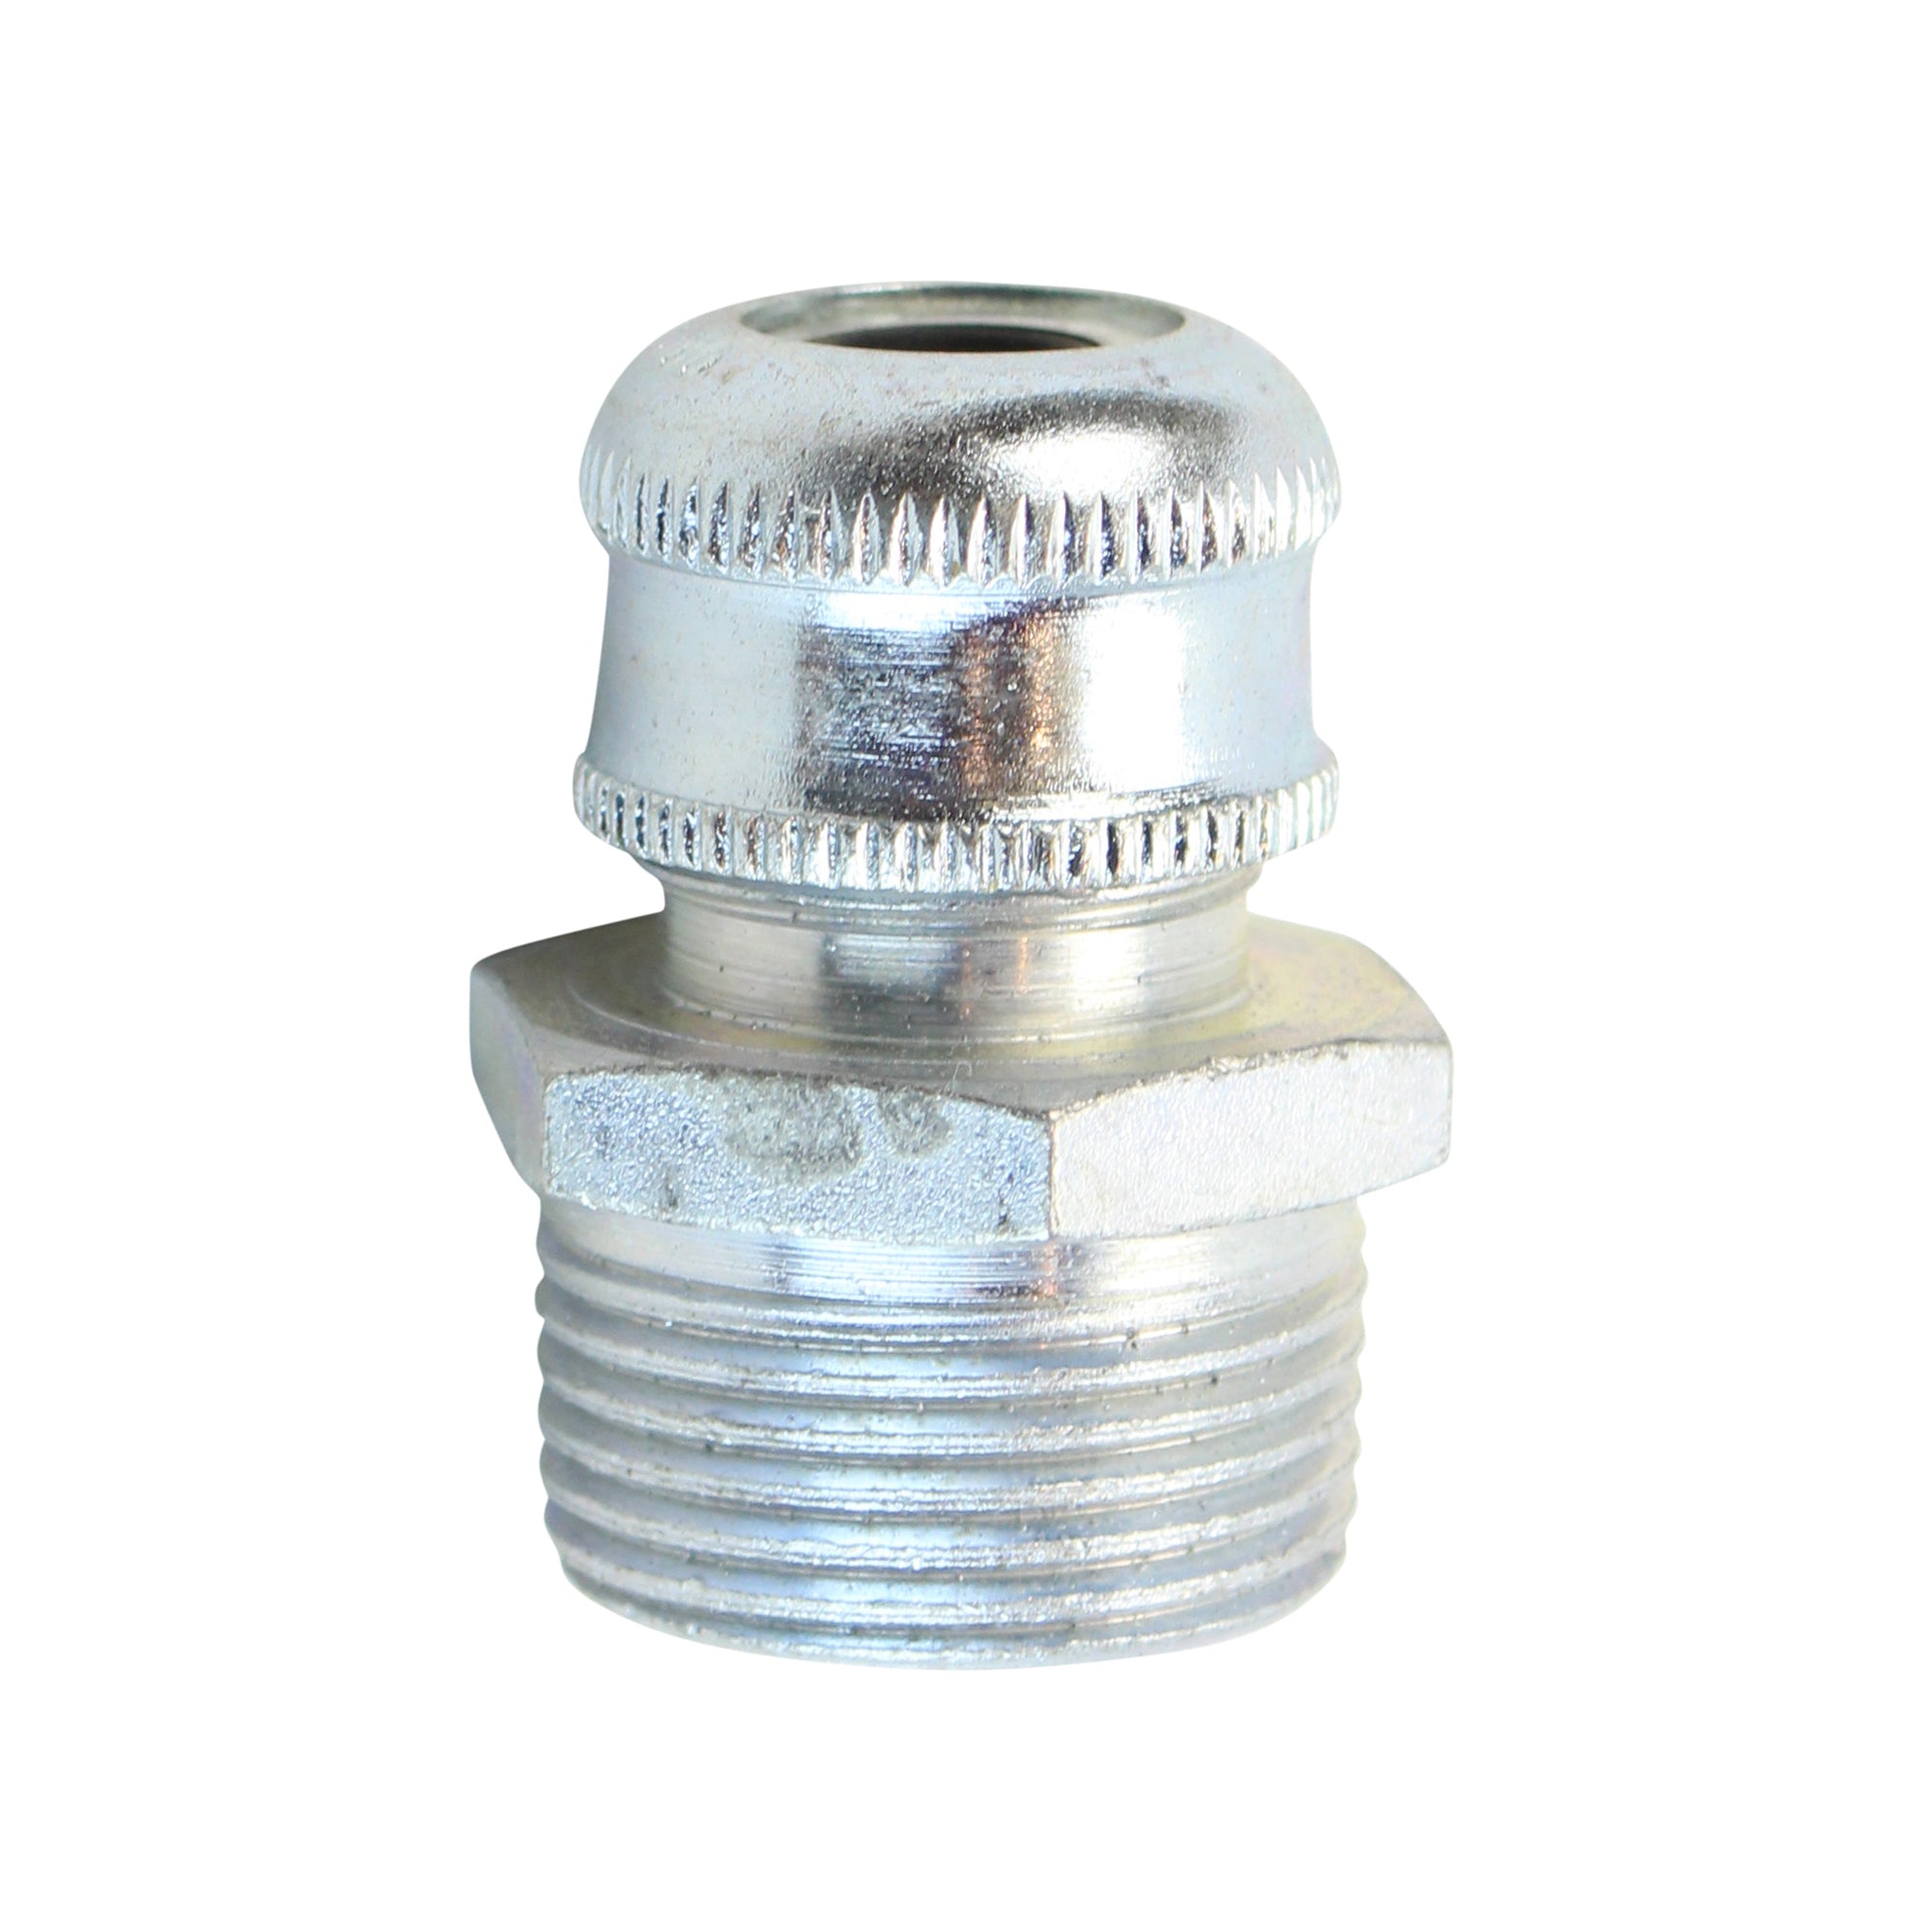 Crouse Hinds, CROUSE-HINDS CGB393 STRAIGHT BODY MALE THREADED CORD & CABLE FITTING, 1" FLEX